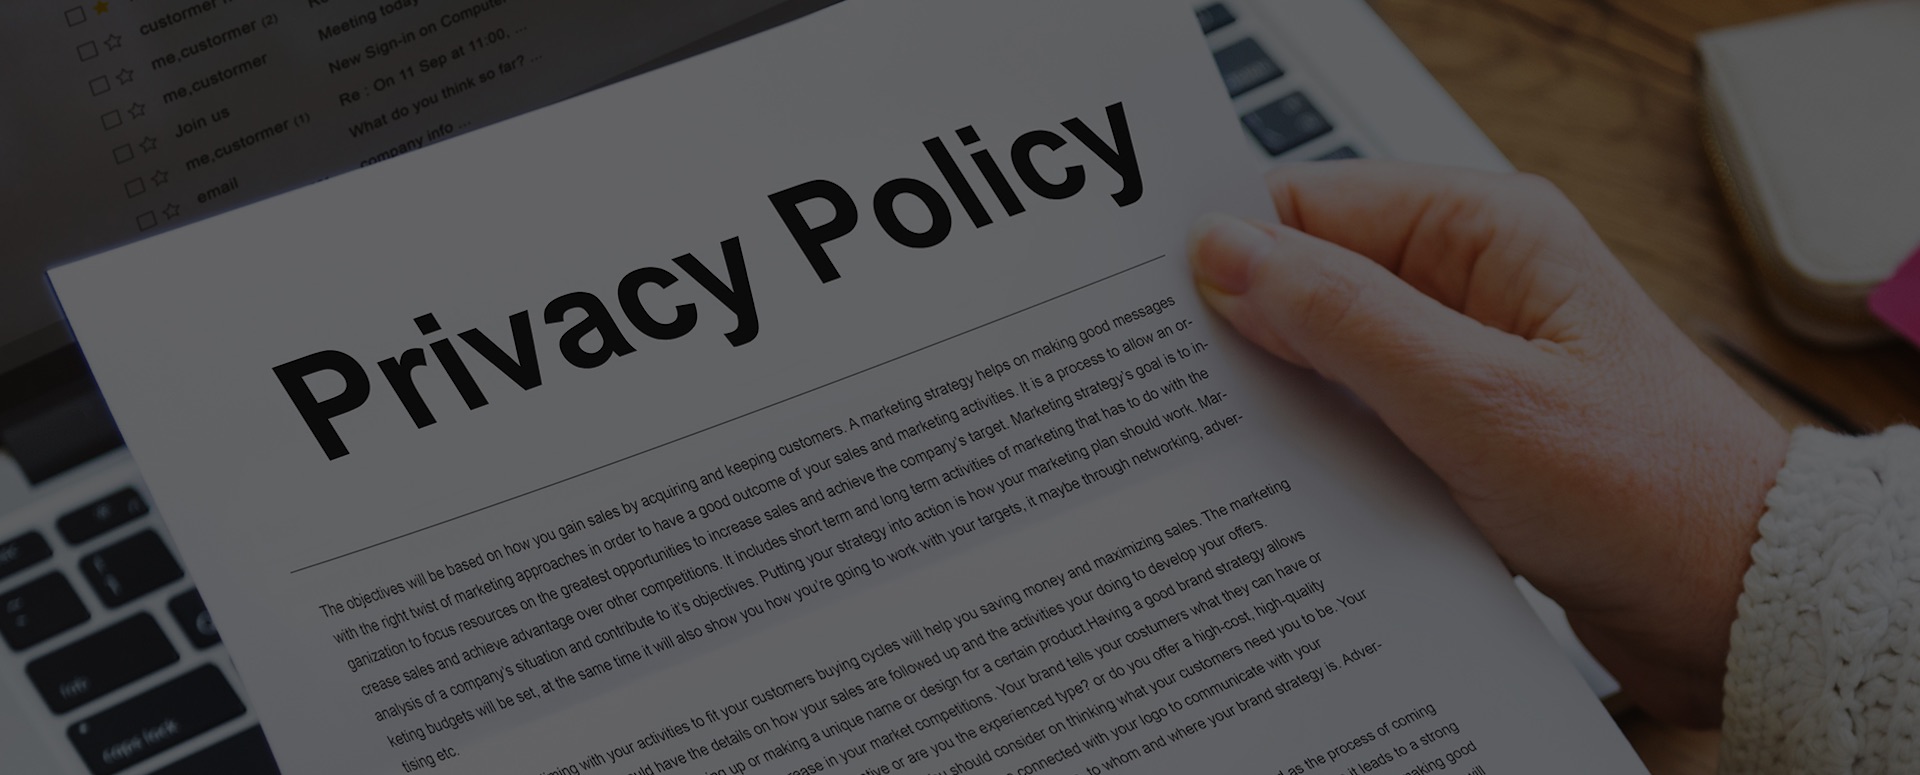 Privacy and Policy